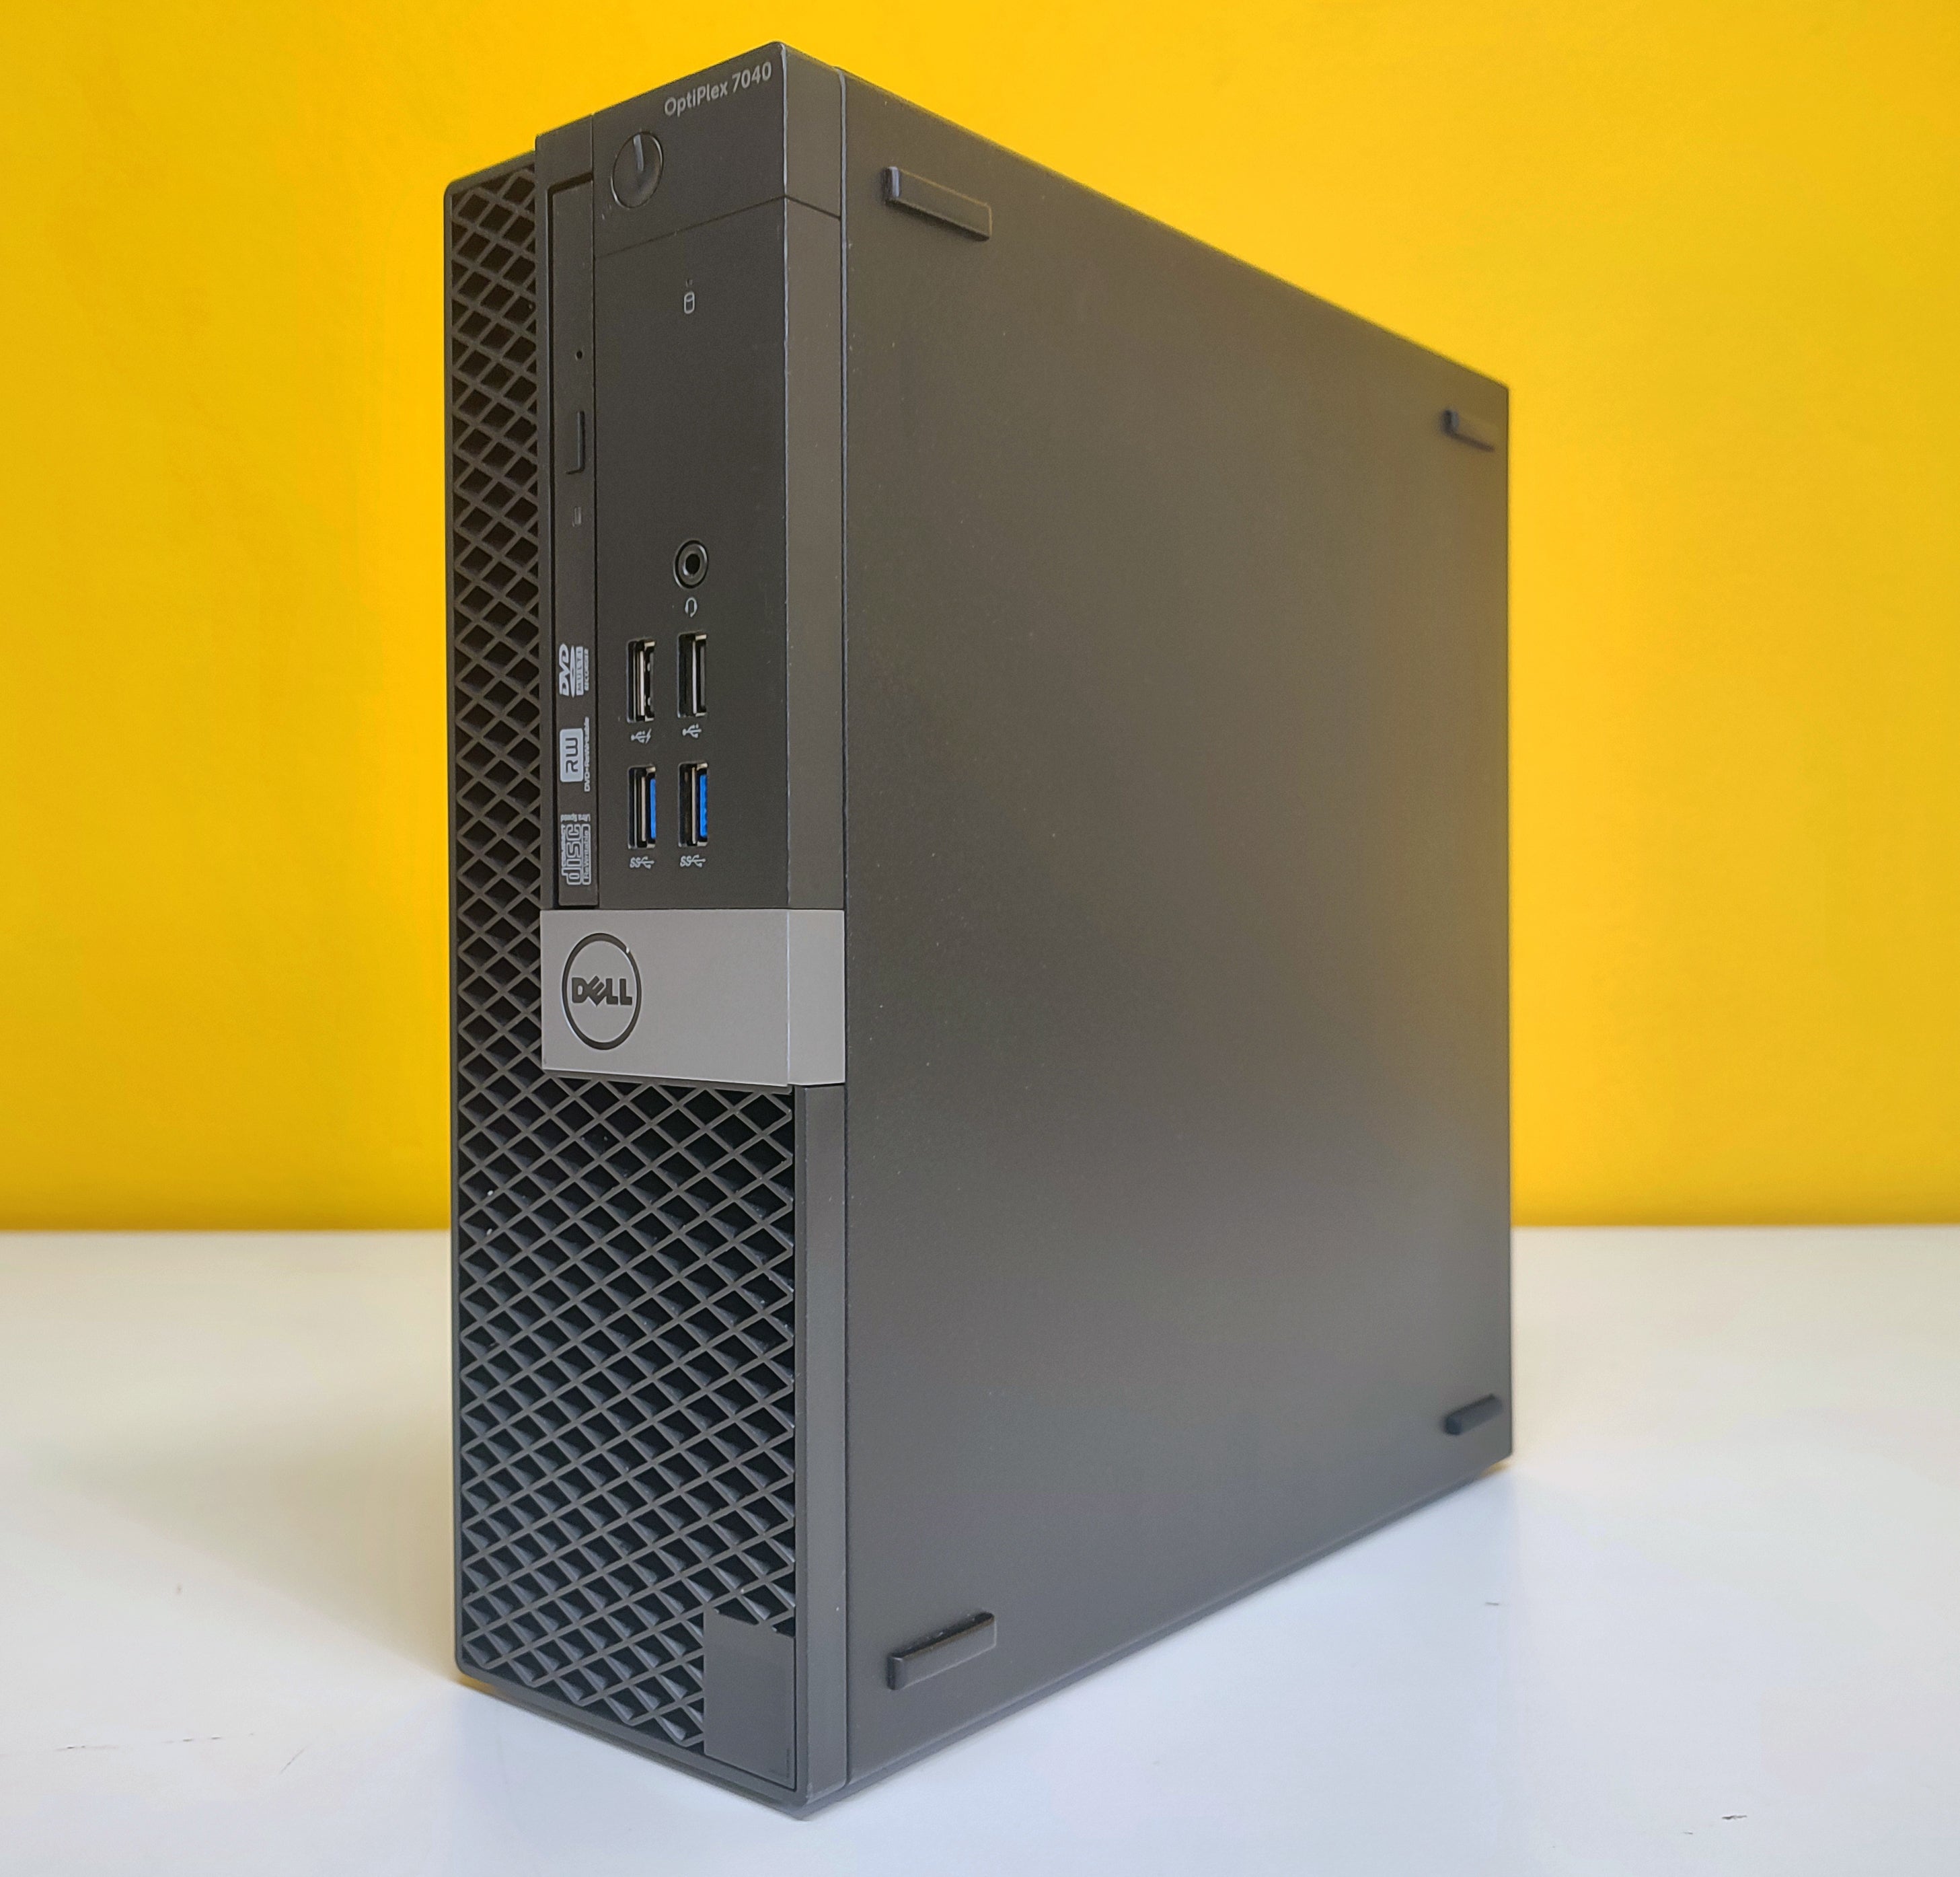 DELL OptiPlex 7040 SFF | Intel Core i7-6700T 2.8Ghz | Ram 8Gb | SSD 256Gb | HDMI Windows 10 Pro The compact and elegant PC for a powerful and reliable workstation